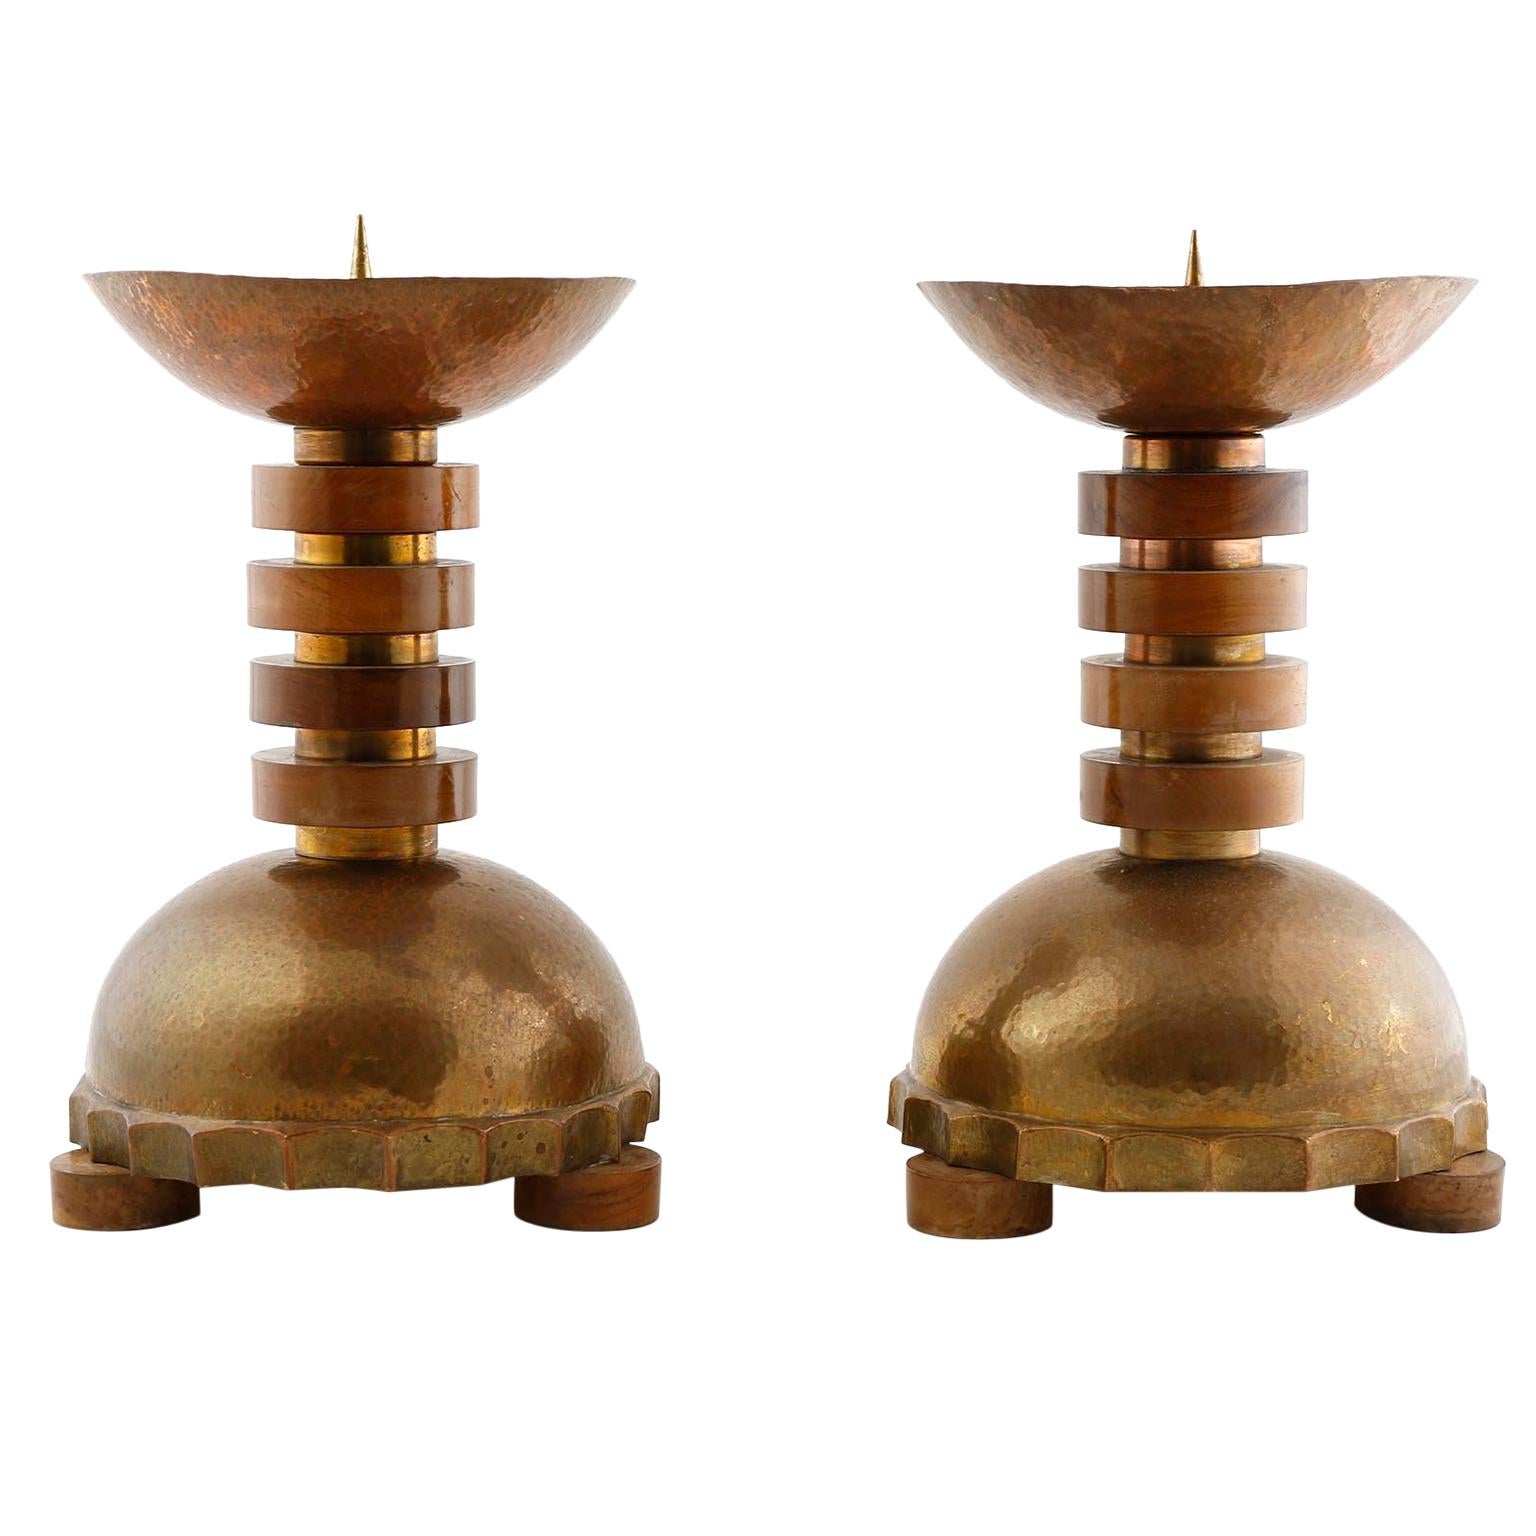 Pair of Large Candleholders, Wood Patinated Hammered Brass Copper, Art Deco